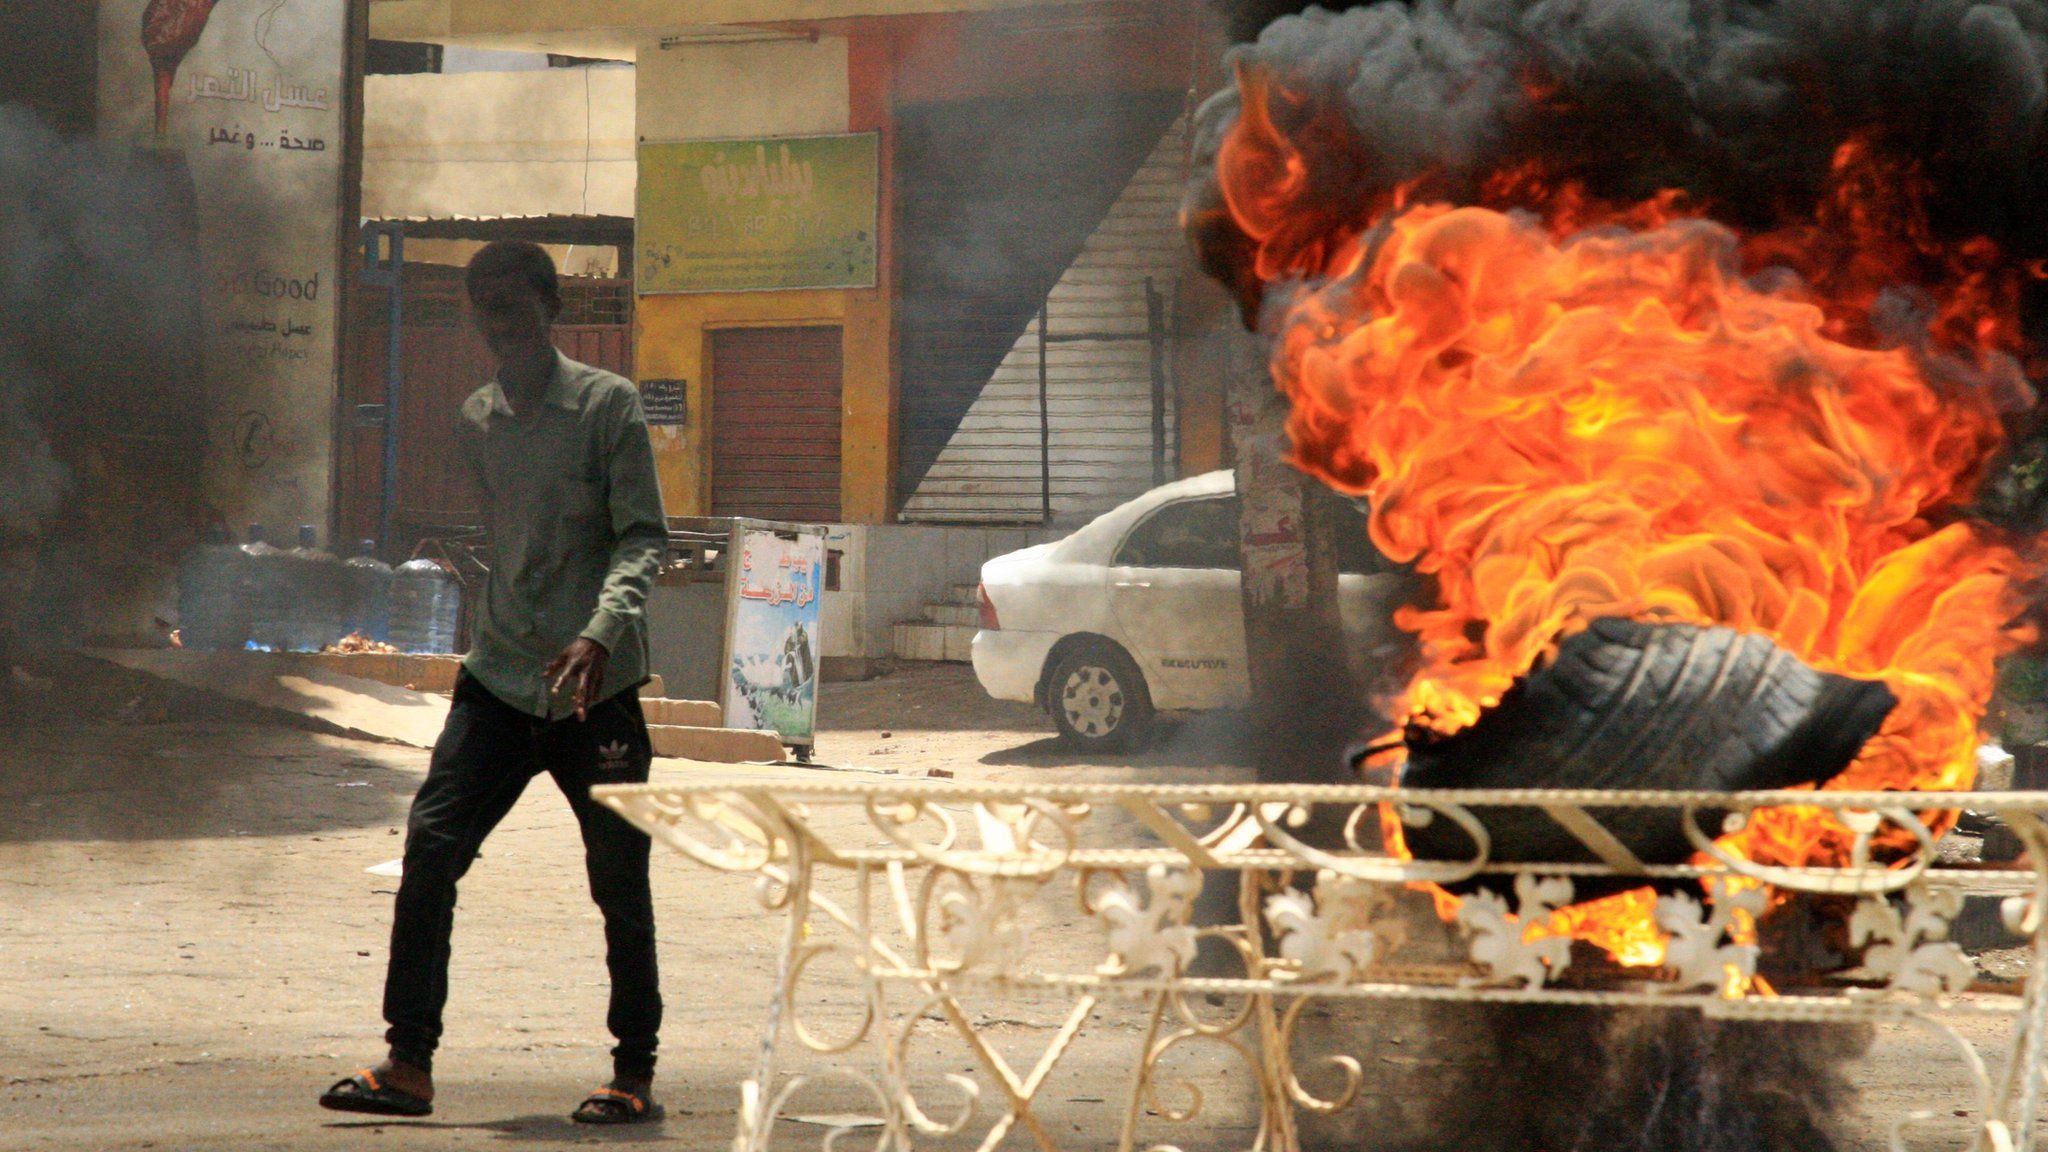 A Sudanese protester walks past a burning tyre near Khartoum's army headquarters